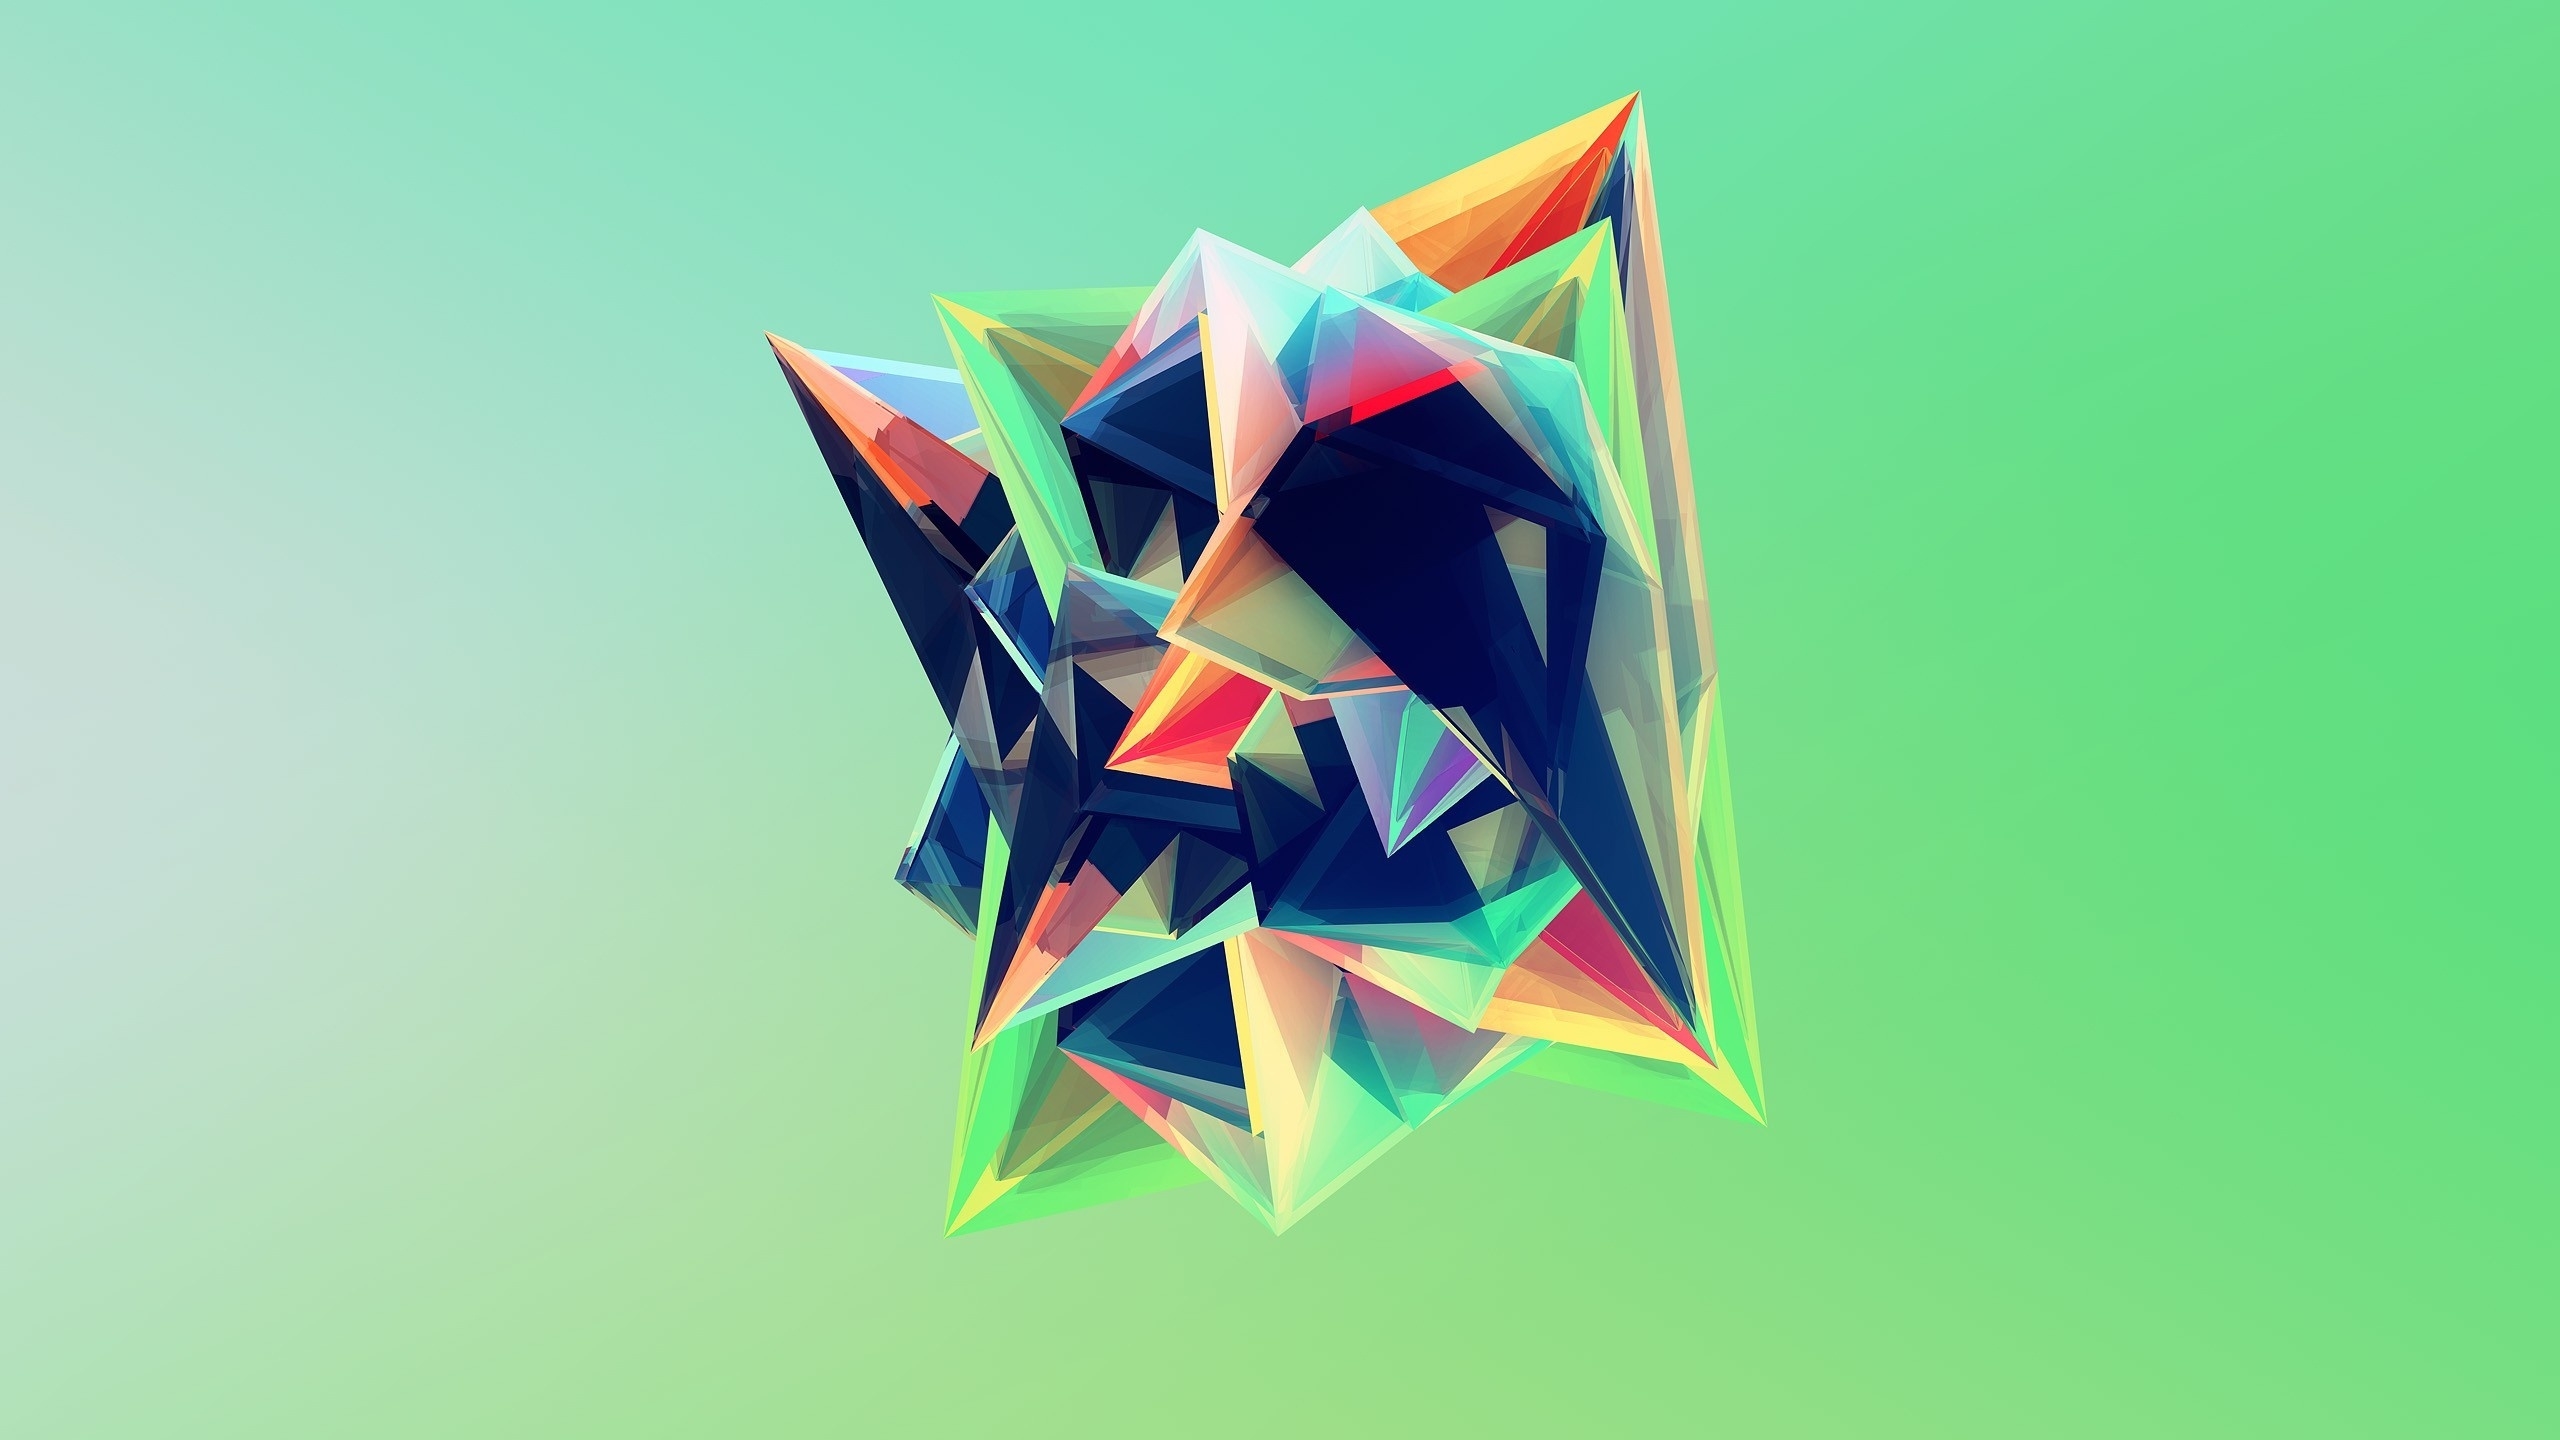 Wallpaper Low Poly Shapes Colorful Triangles Resolution2560x1440